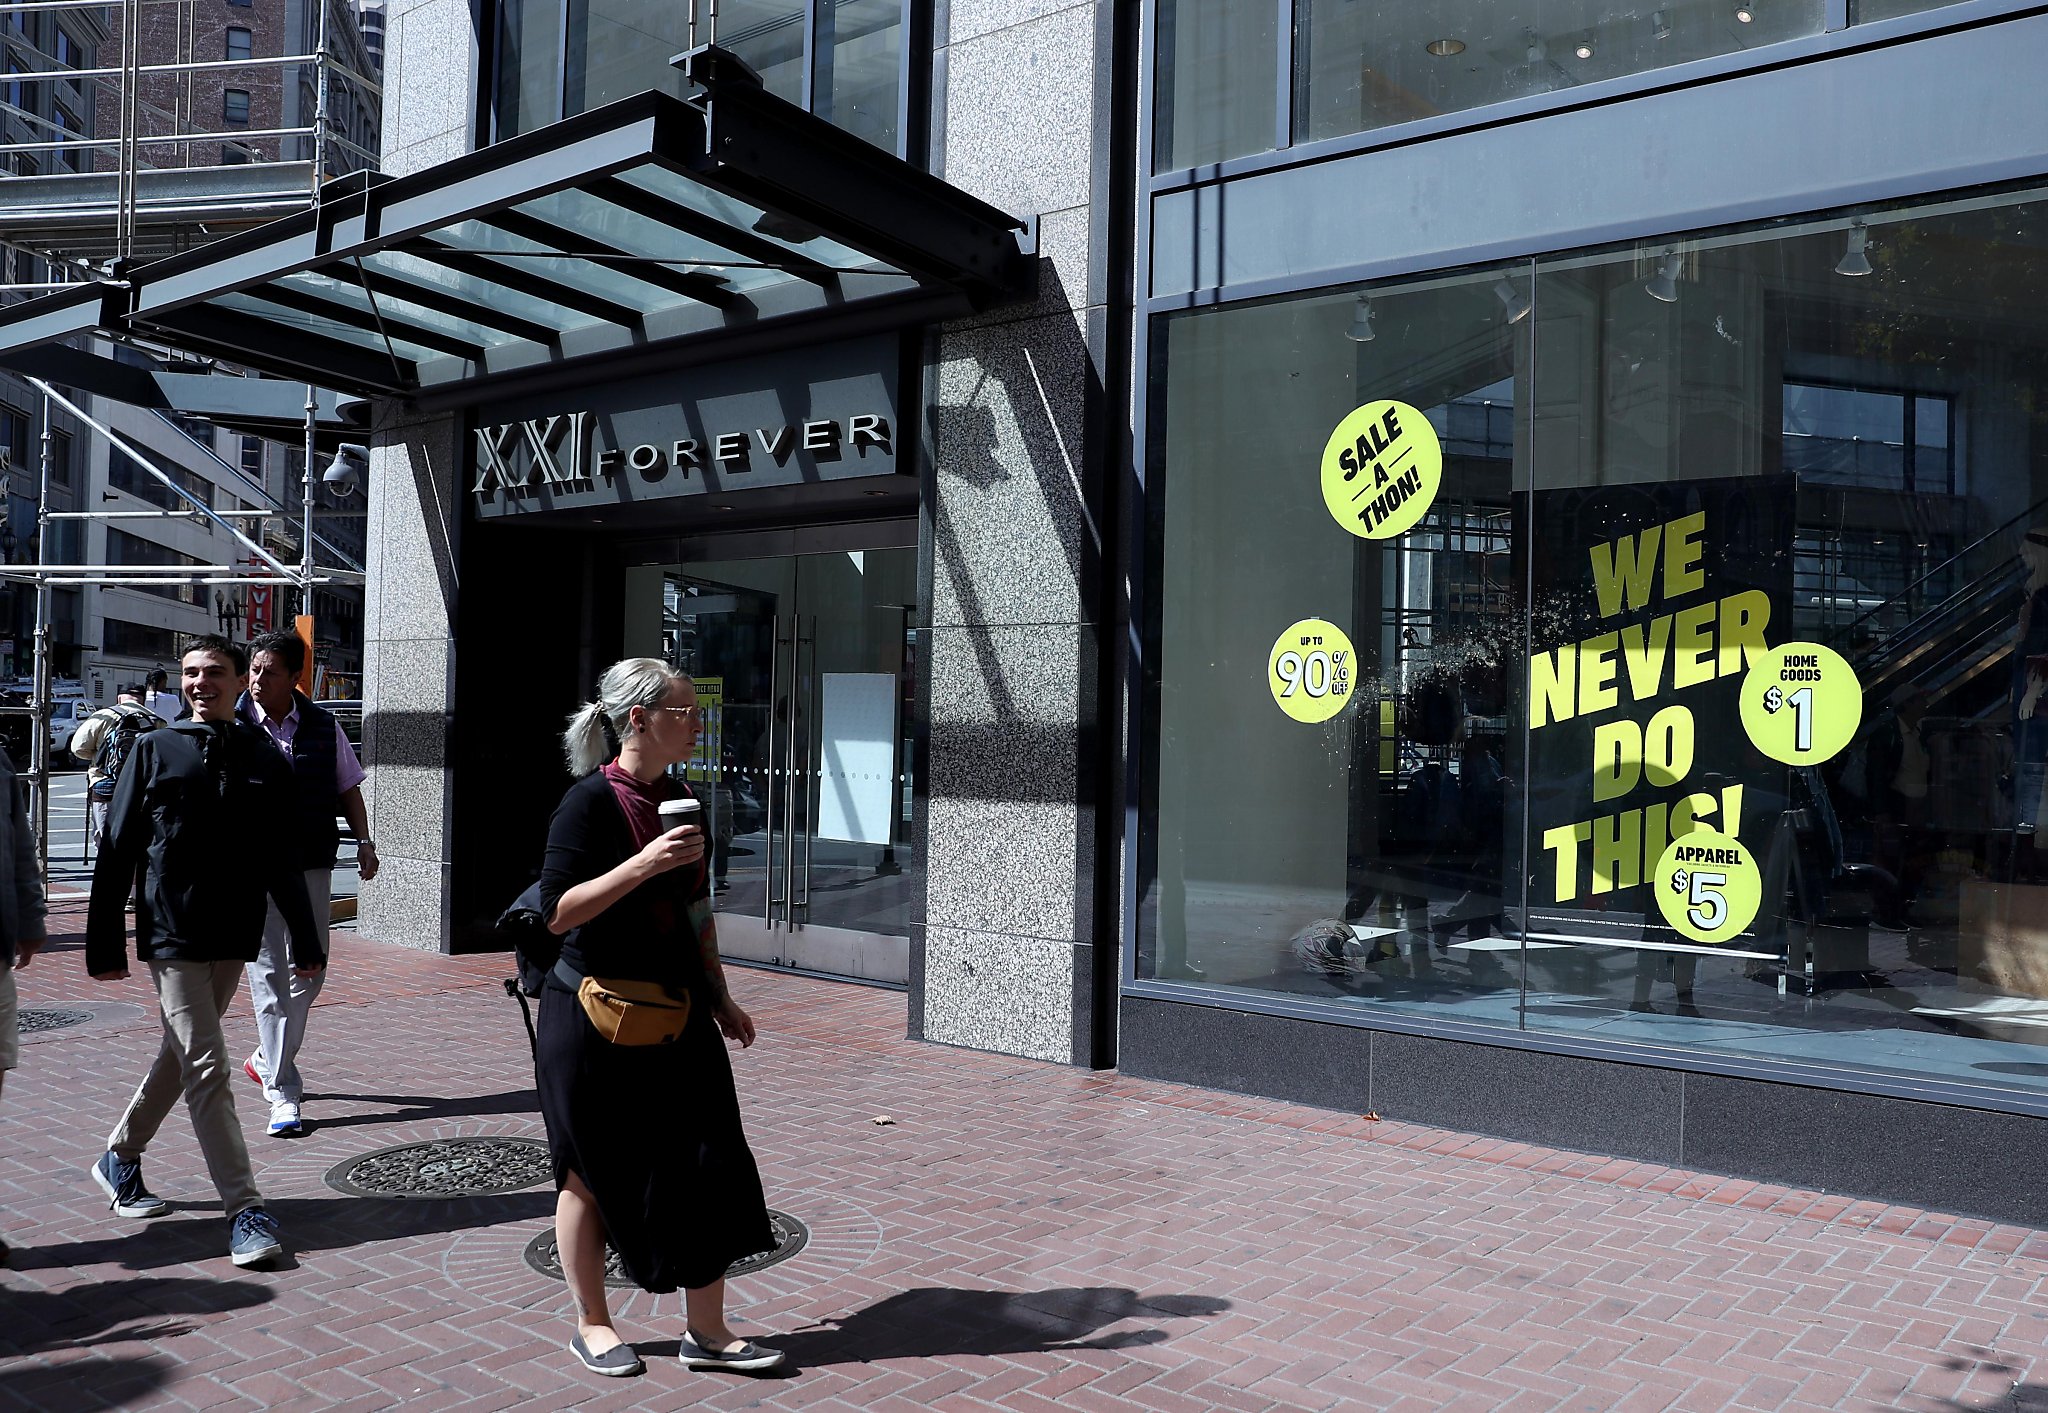 Forever 21 reportedly closing 100 stores on restructure